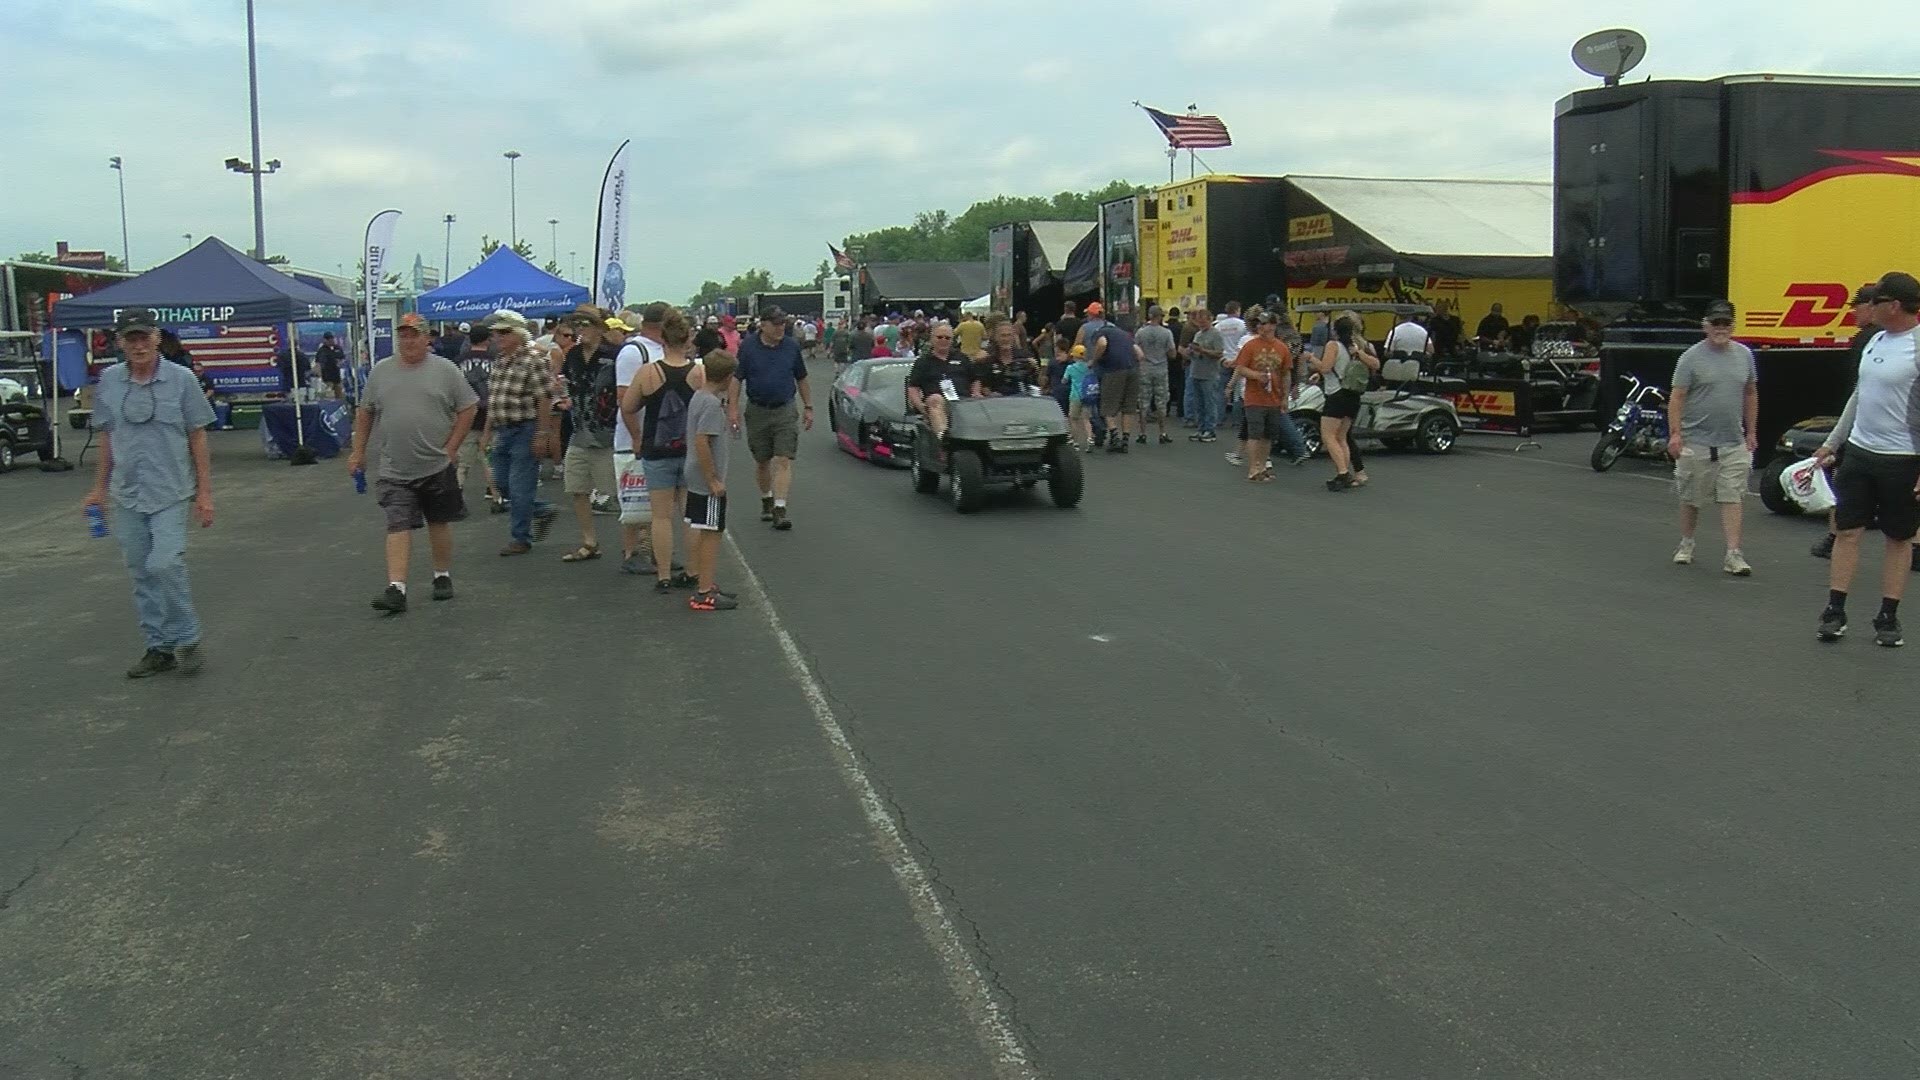 Fans came out in droves to hear the roaring engines after last year's NHRA event in Norwalk was canceled due to COVID-19.